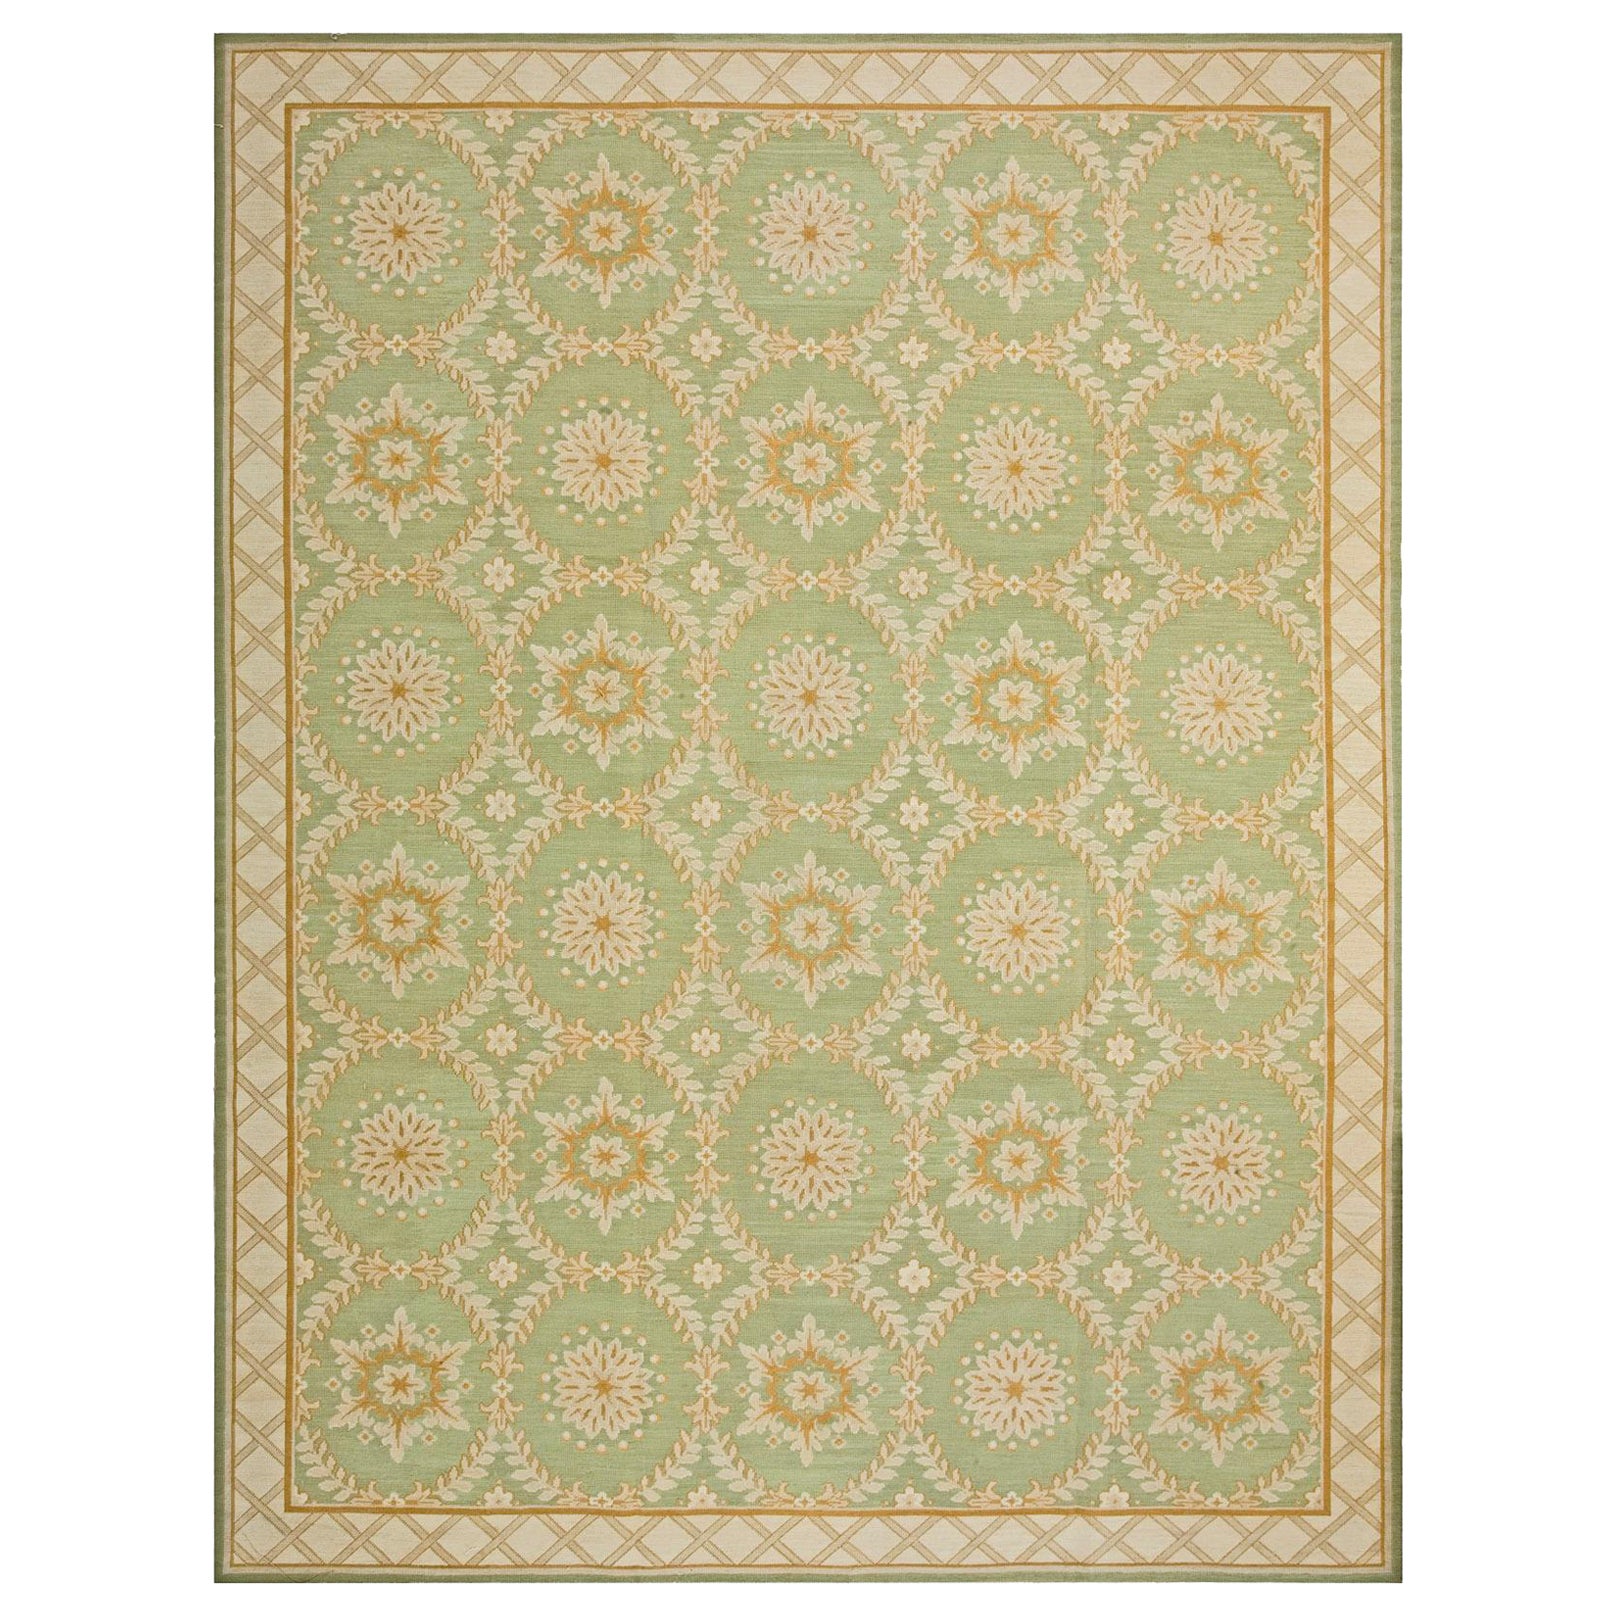 Contemporaneity Handwoven Wool Needlepoint Flat Weave Carpet For Sale